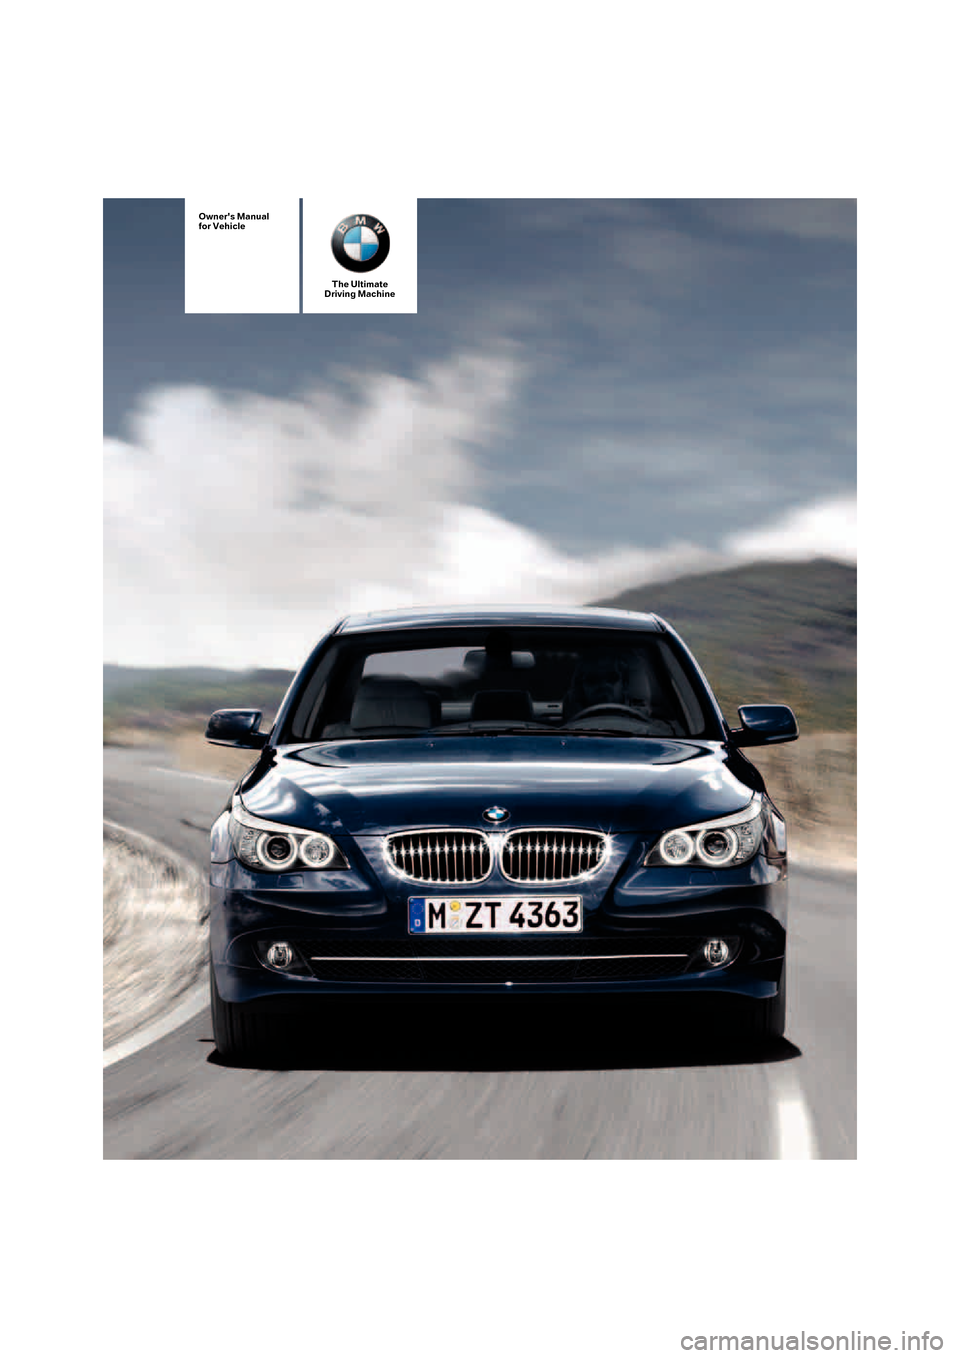 BMW 528I SEDAN 2007 E60 Owners Manual The Ultimate
Driving Machine
Owners Manual
for Vehicle 